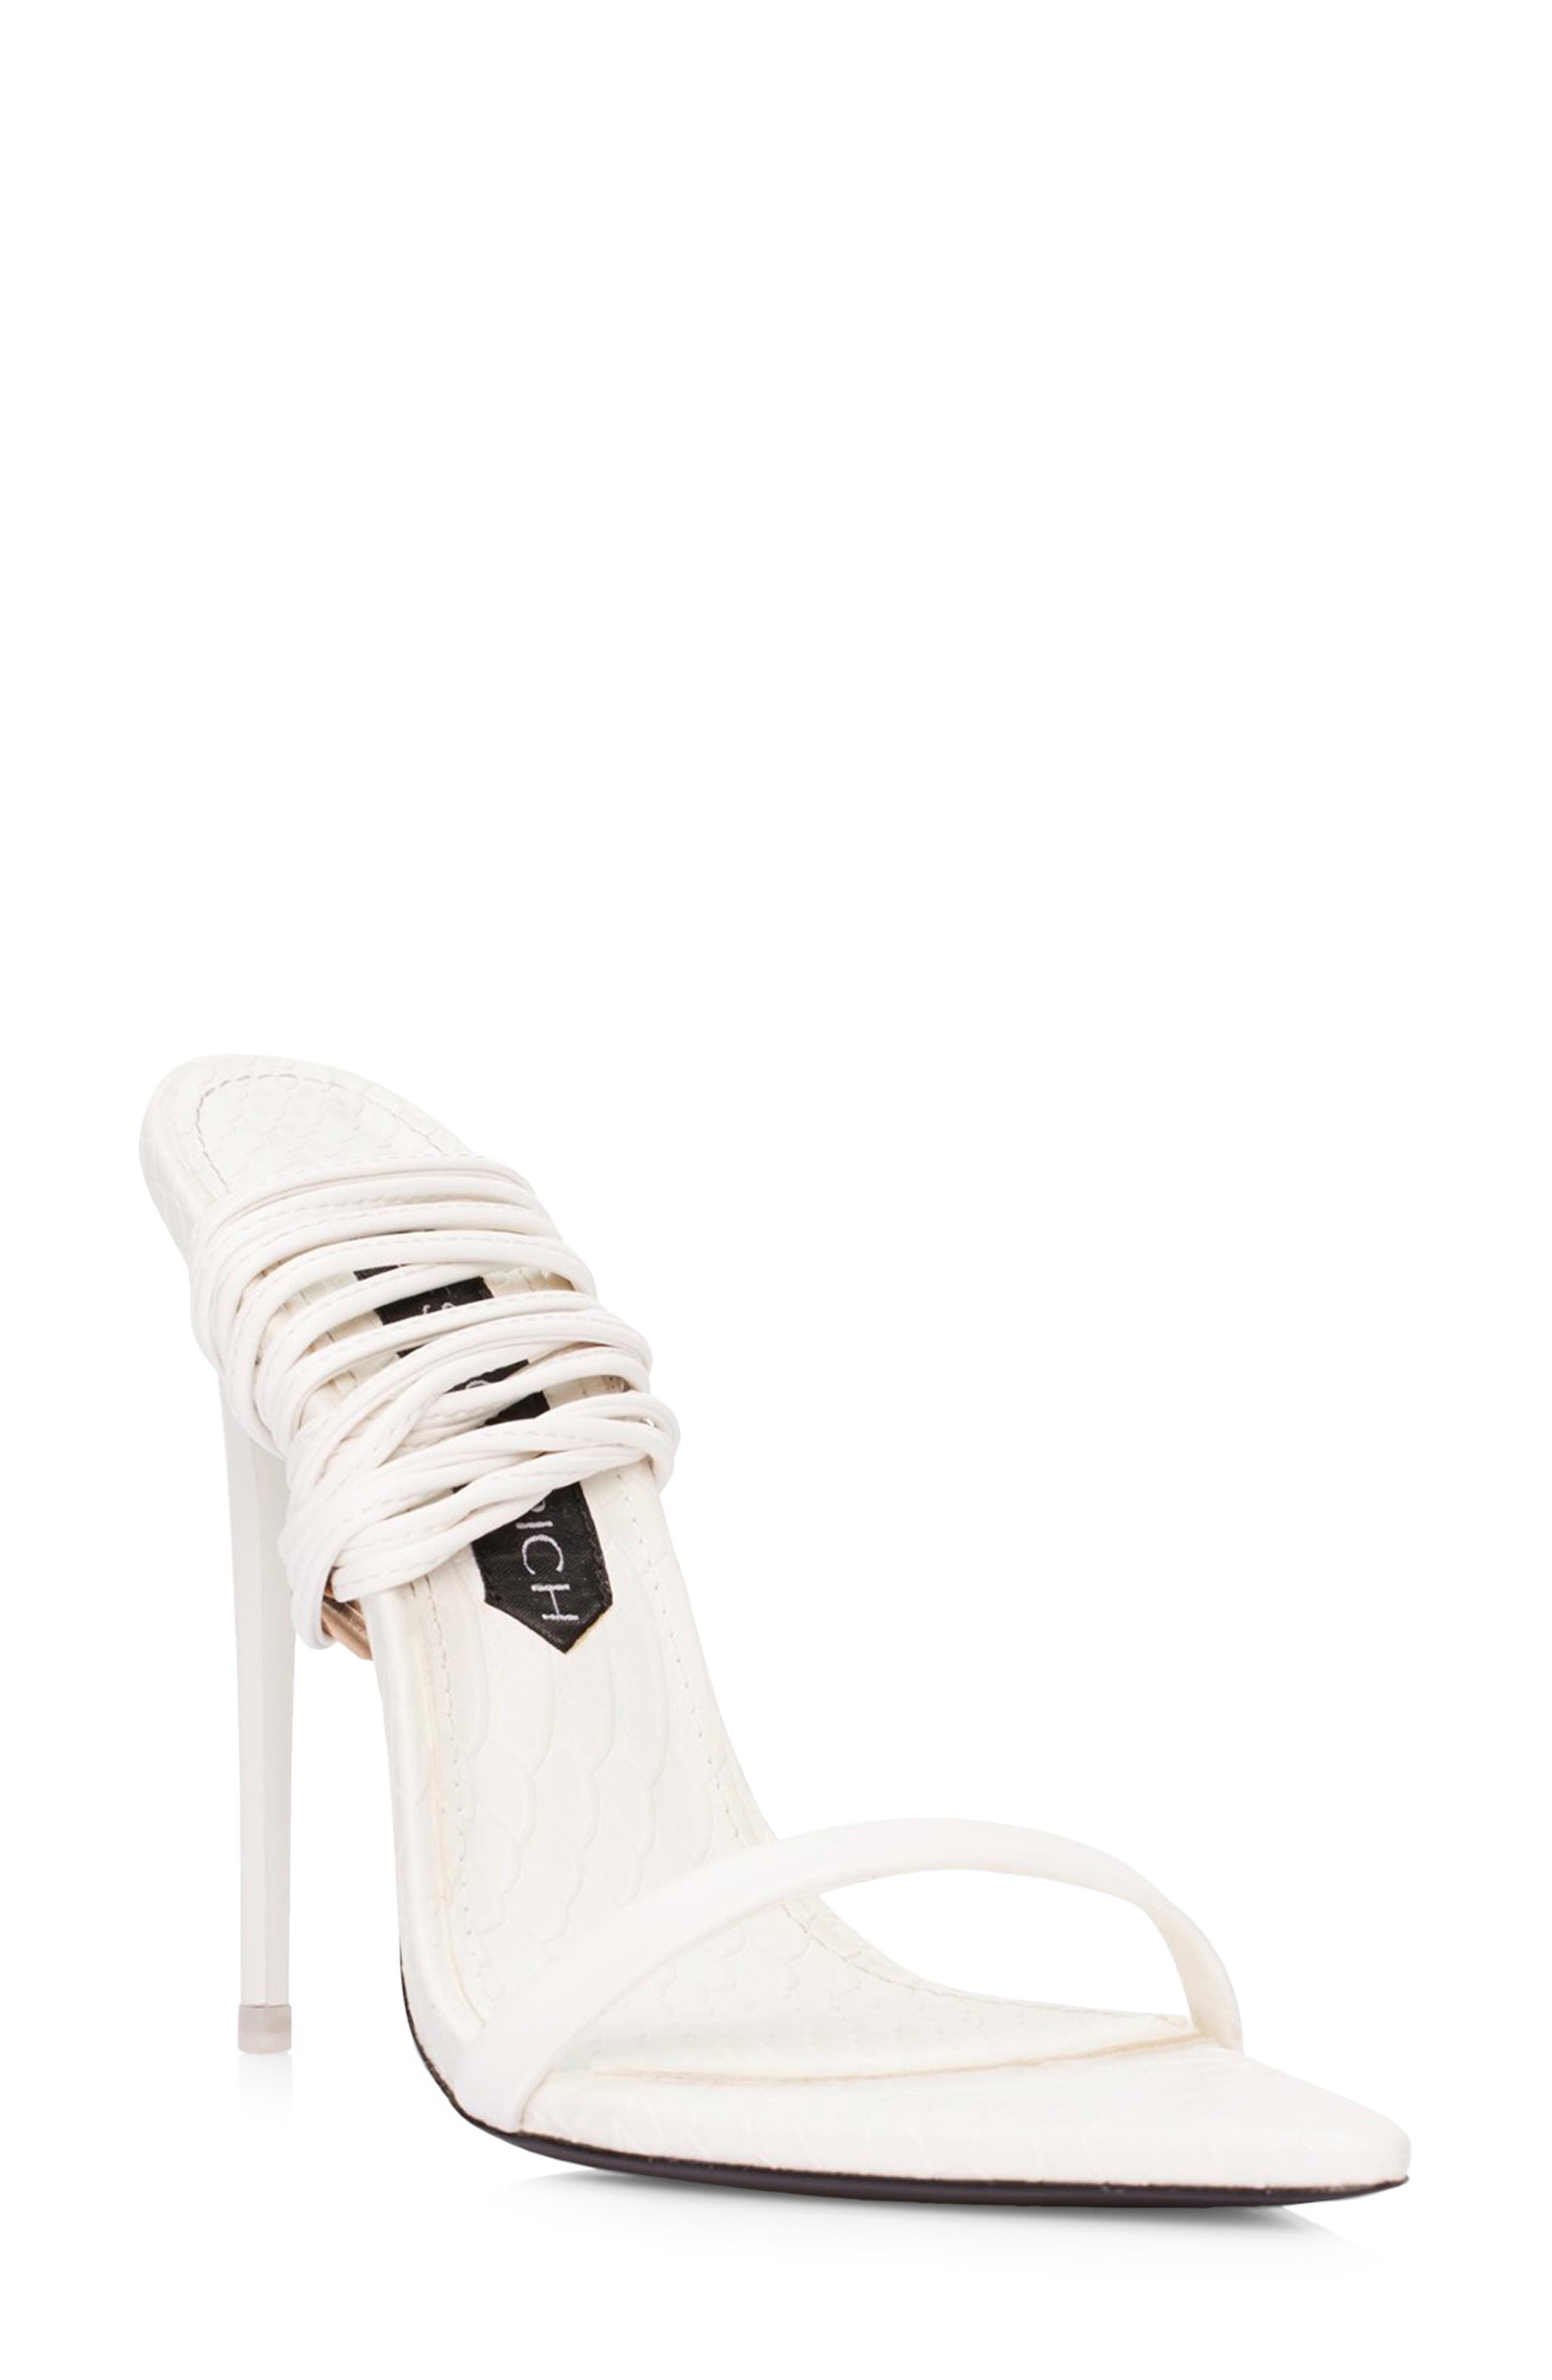 JESSICA RICH Sandal in White at Nordstrom